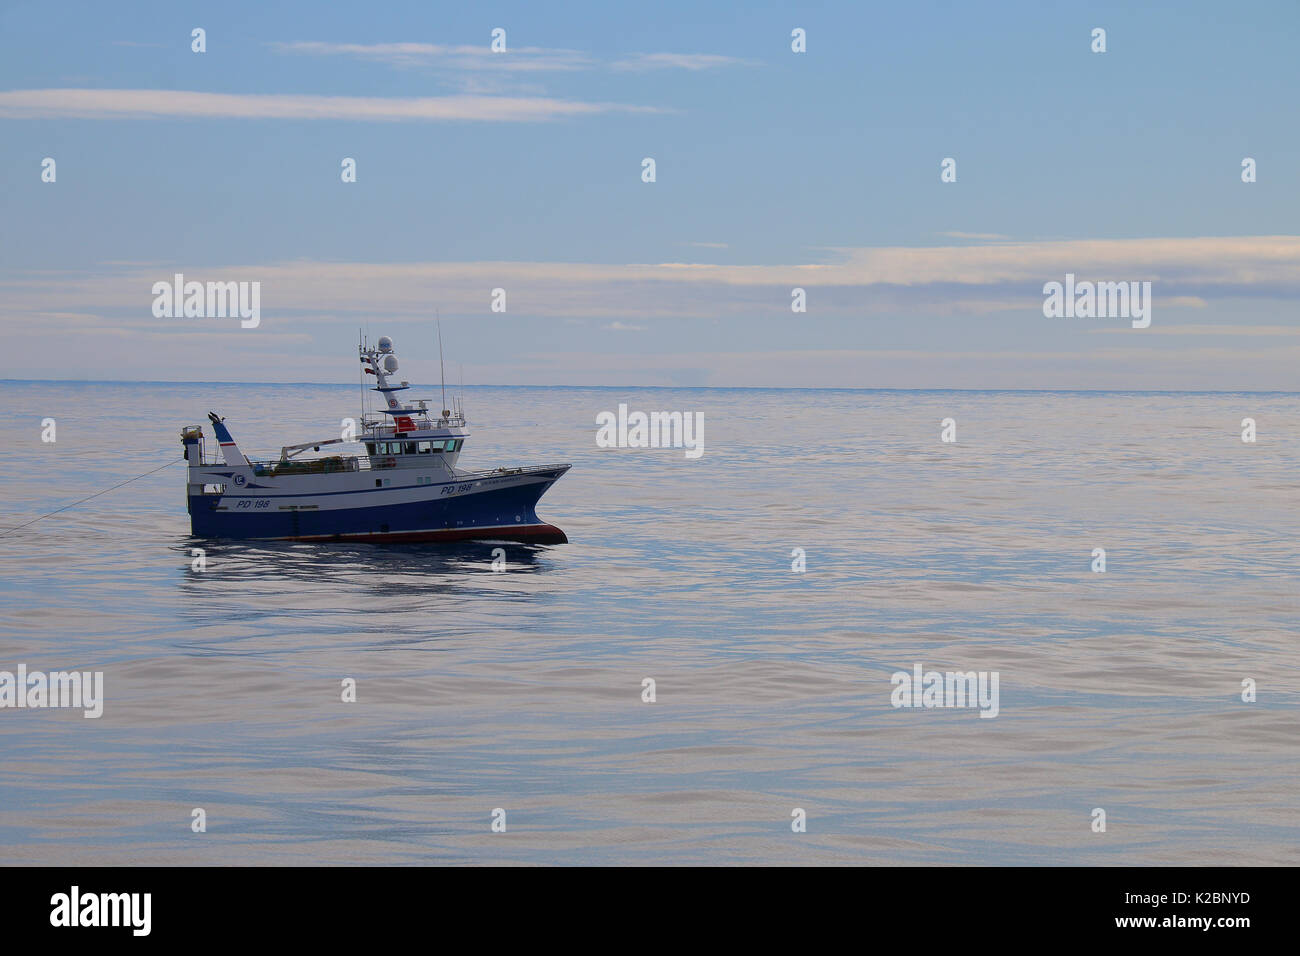 Fishing vessel 'Ocean Harvest' trawling in calm weather west of Shetland, April 2015.  Property released. Stock Photo